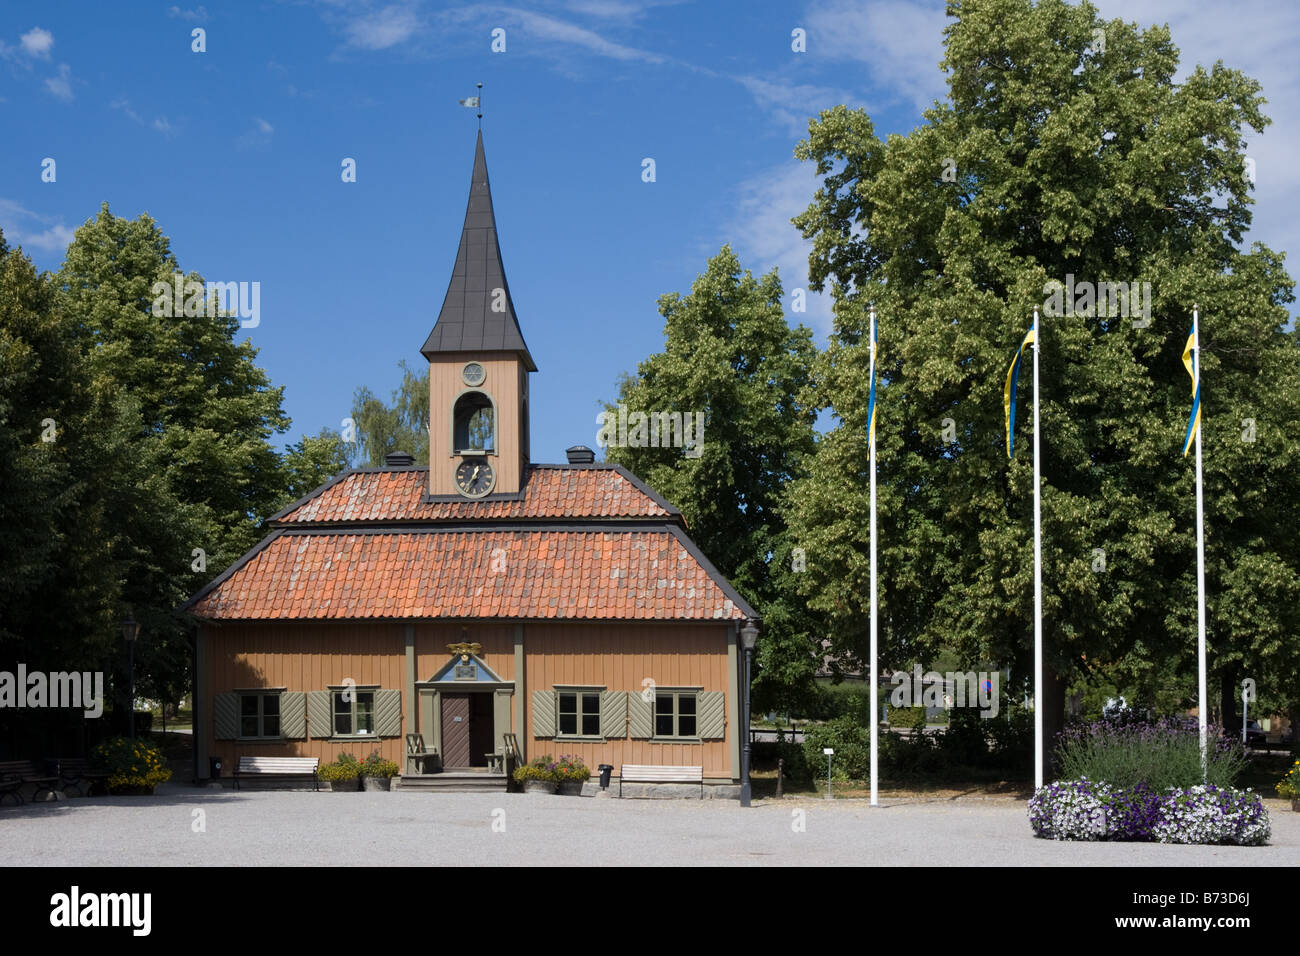 Town hall, Sigtuna, Sweden Stock Photo